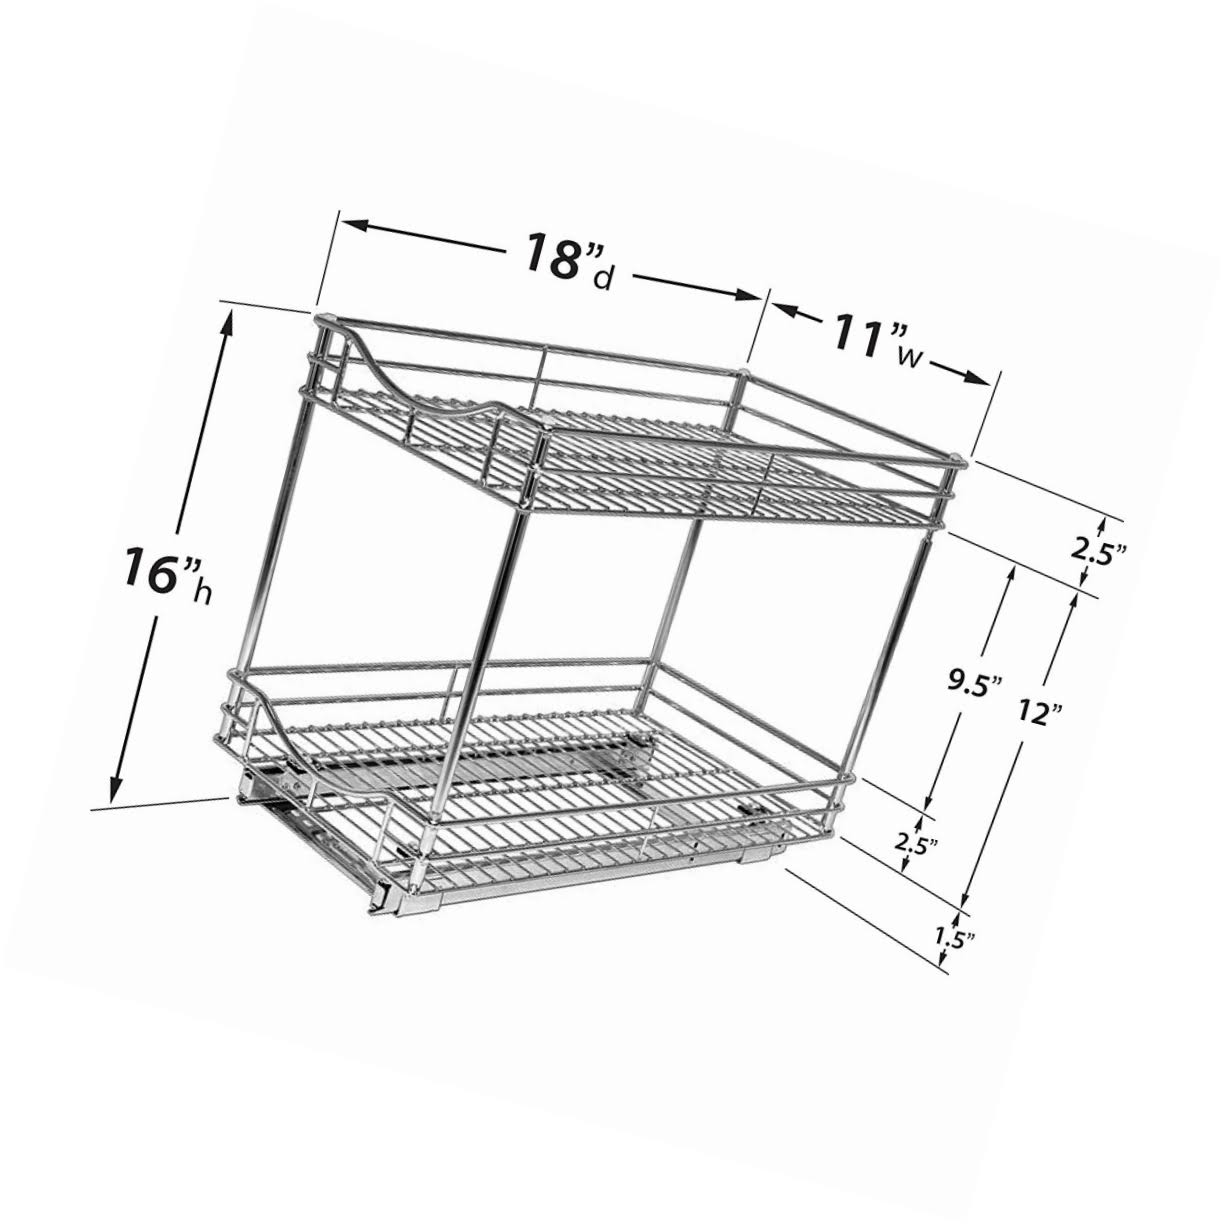 Lynk Professional Slide Out Double Shelf Pull Out Two Tier - WXF-02